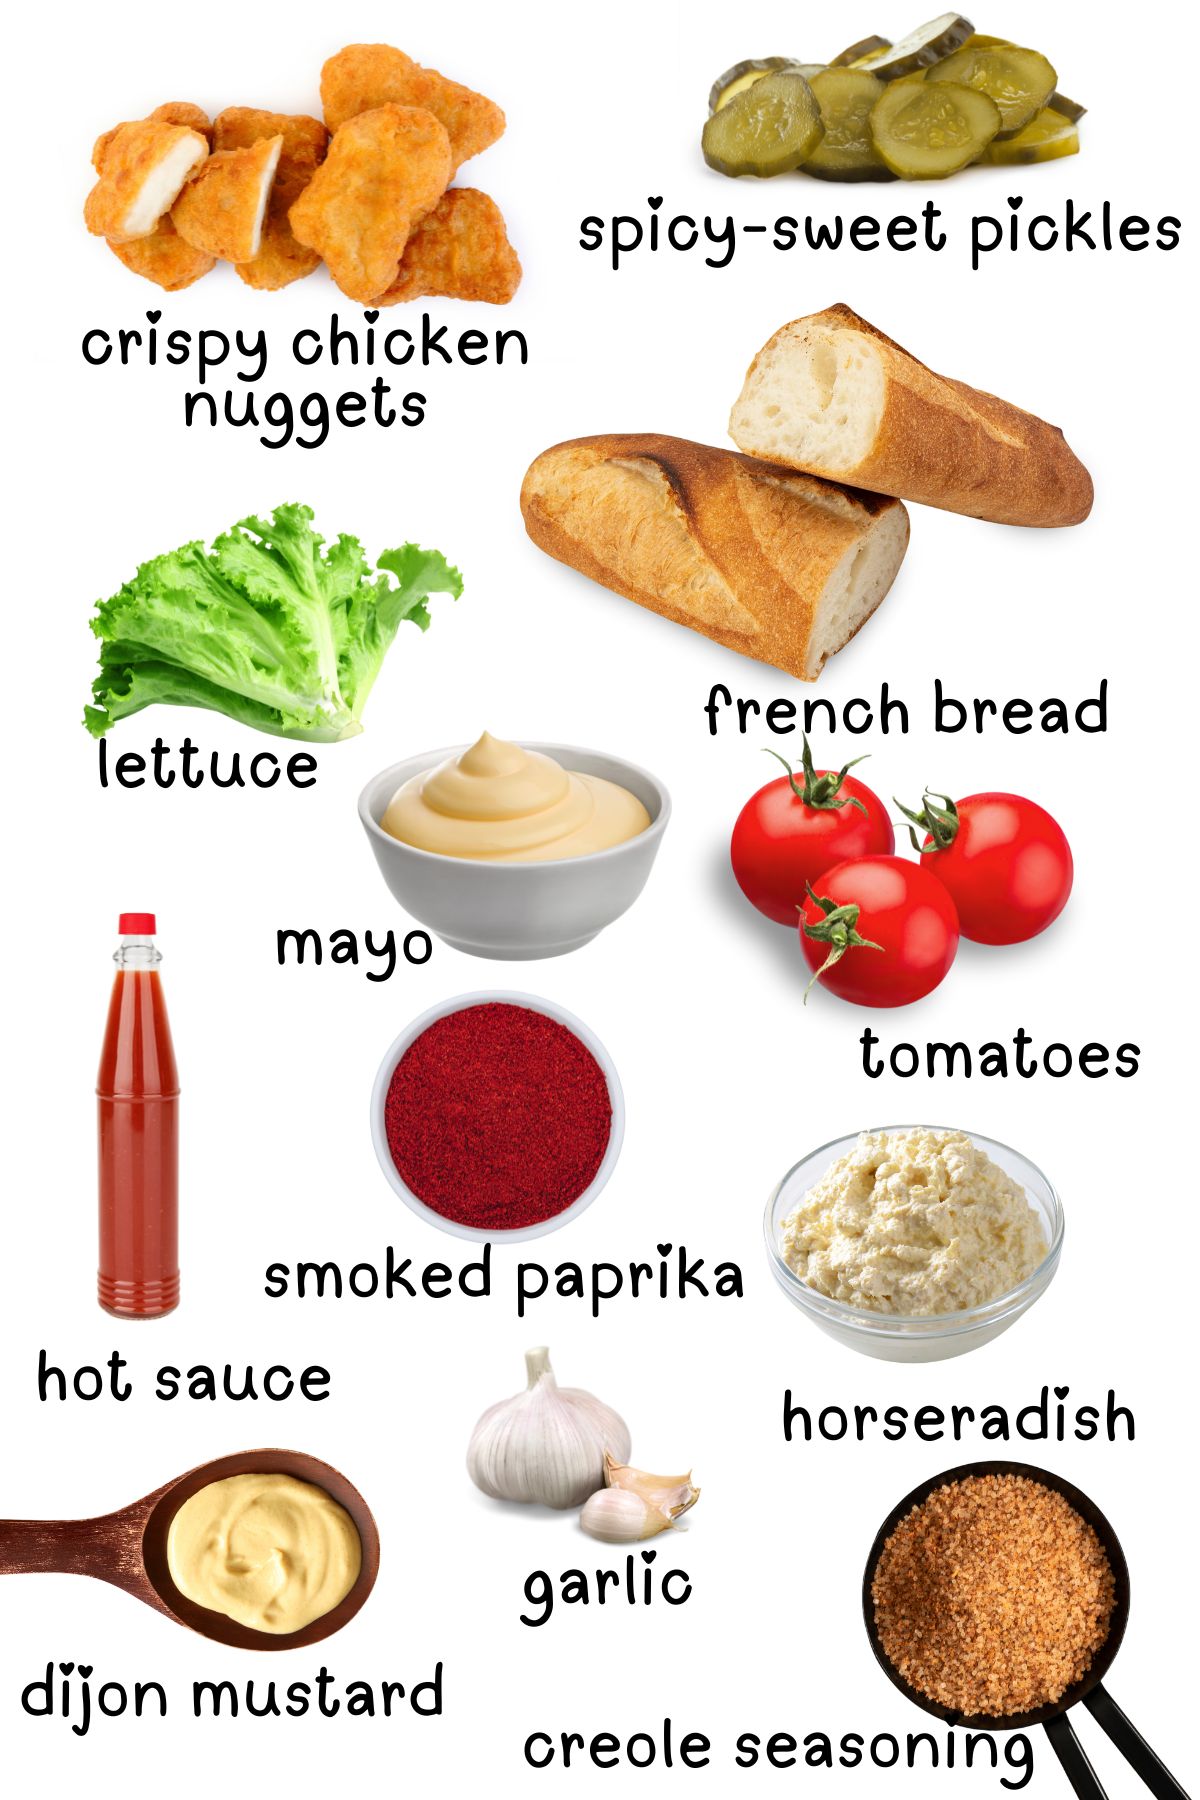 Labeled ingredients for chicken po' boy recipe.